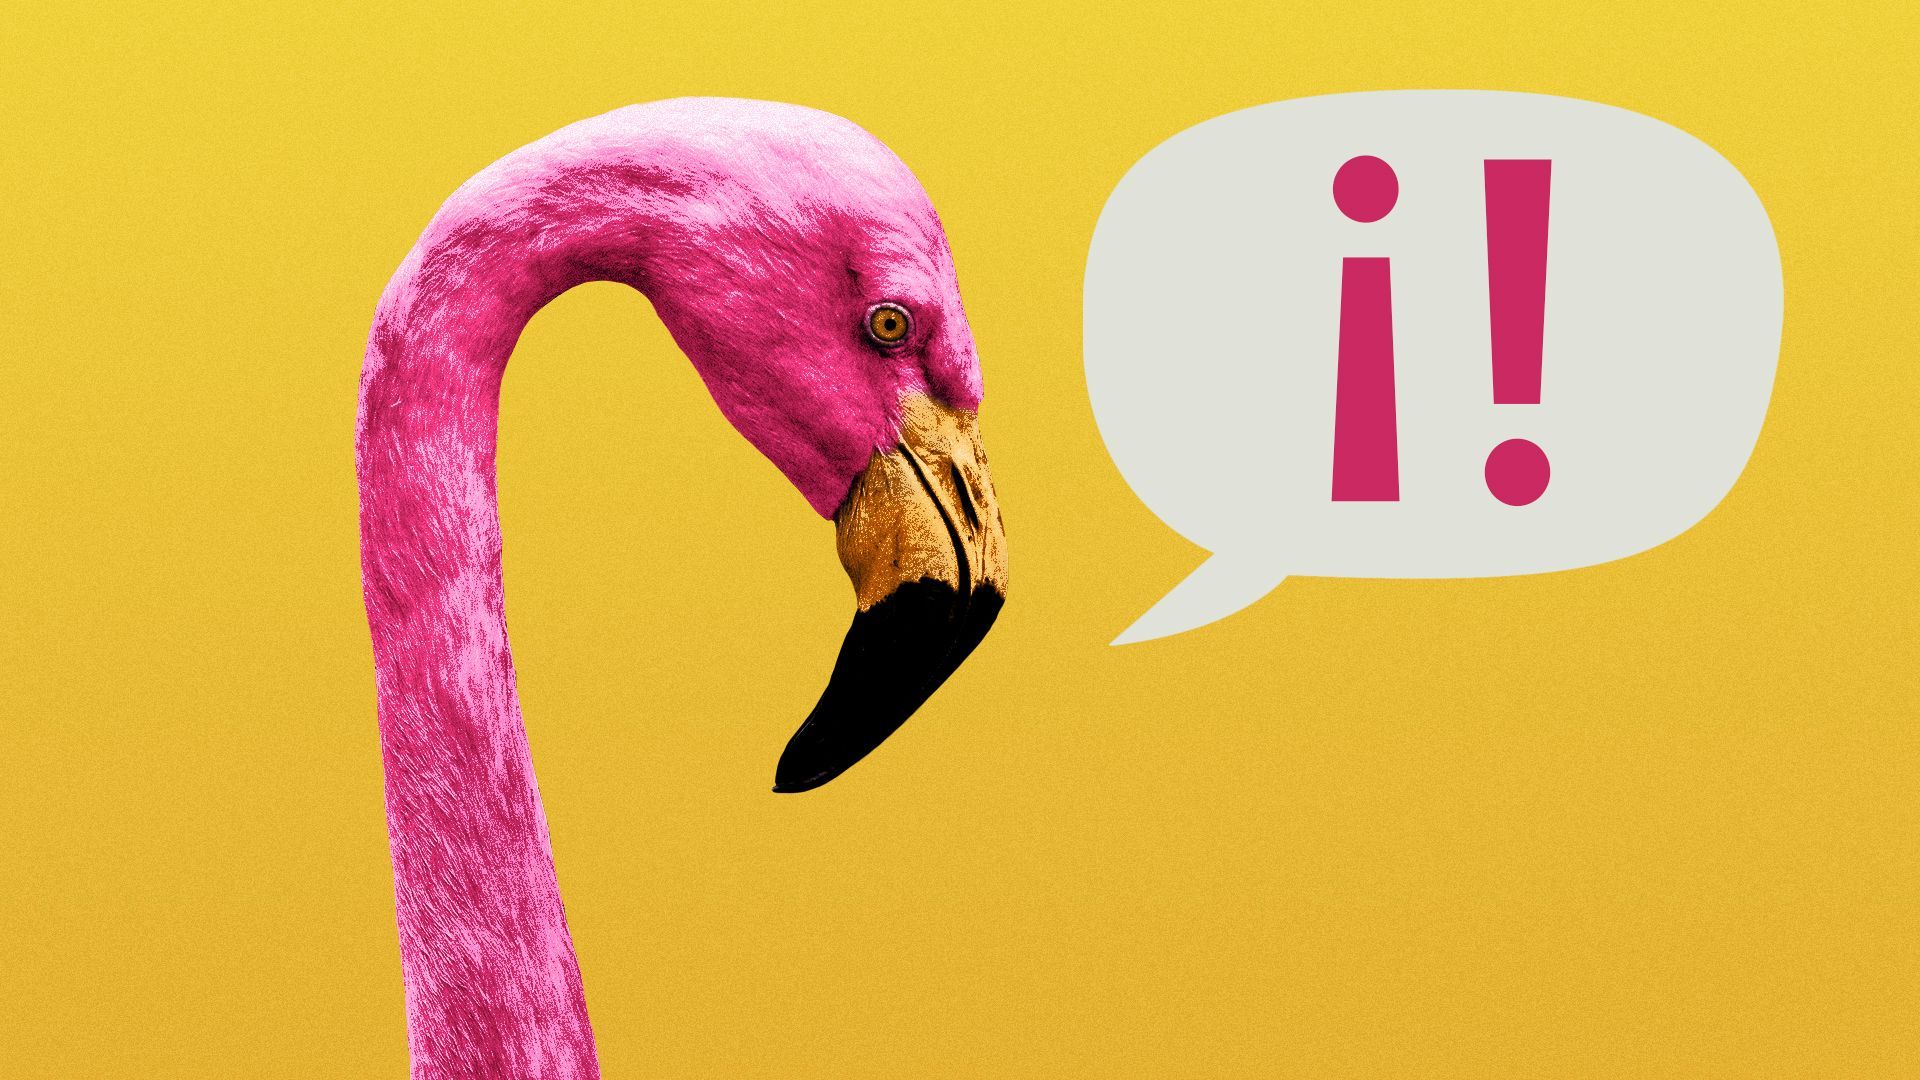 Illustration of a flamingo and a speech bubble containing an inverted exclamation point and a standard exclamation point.